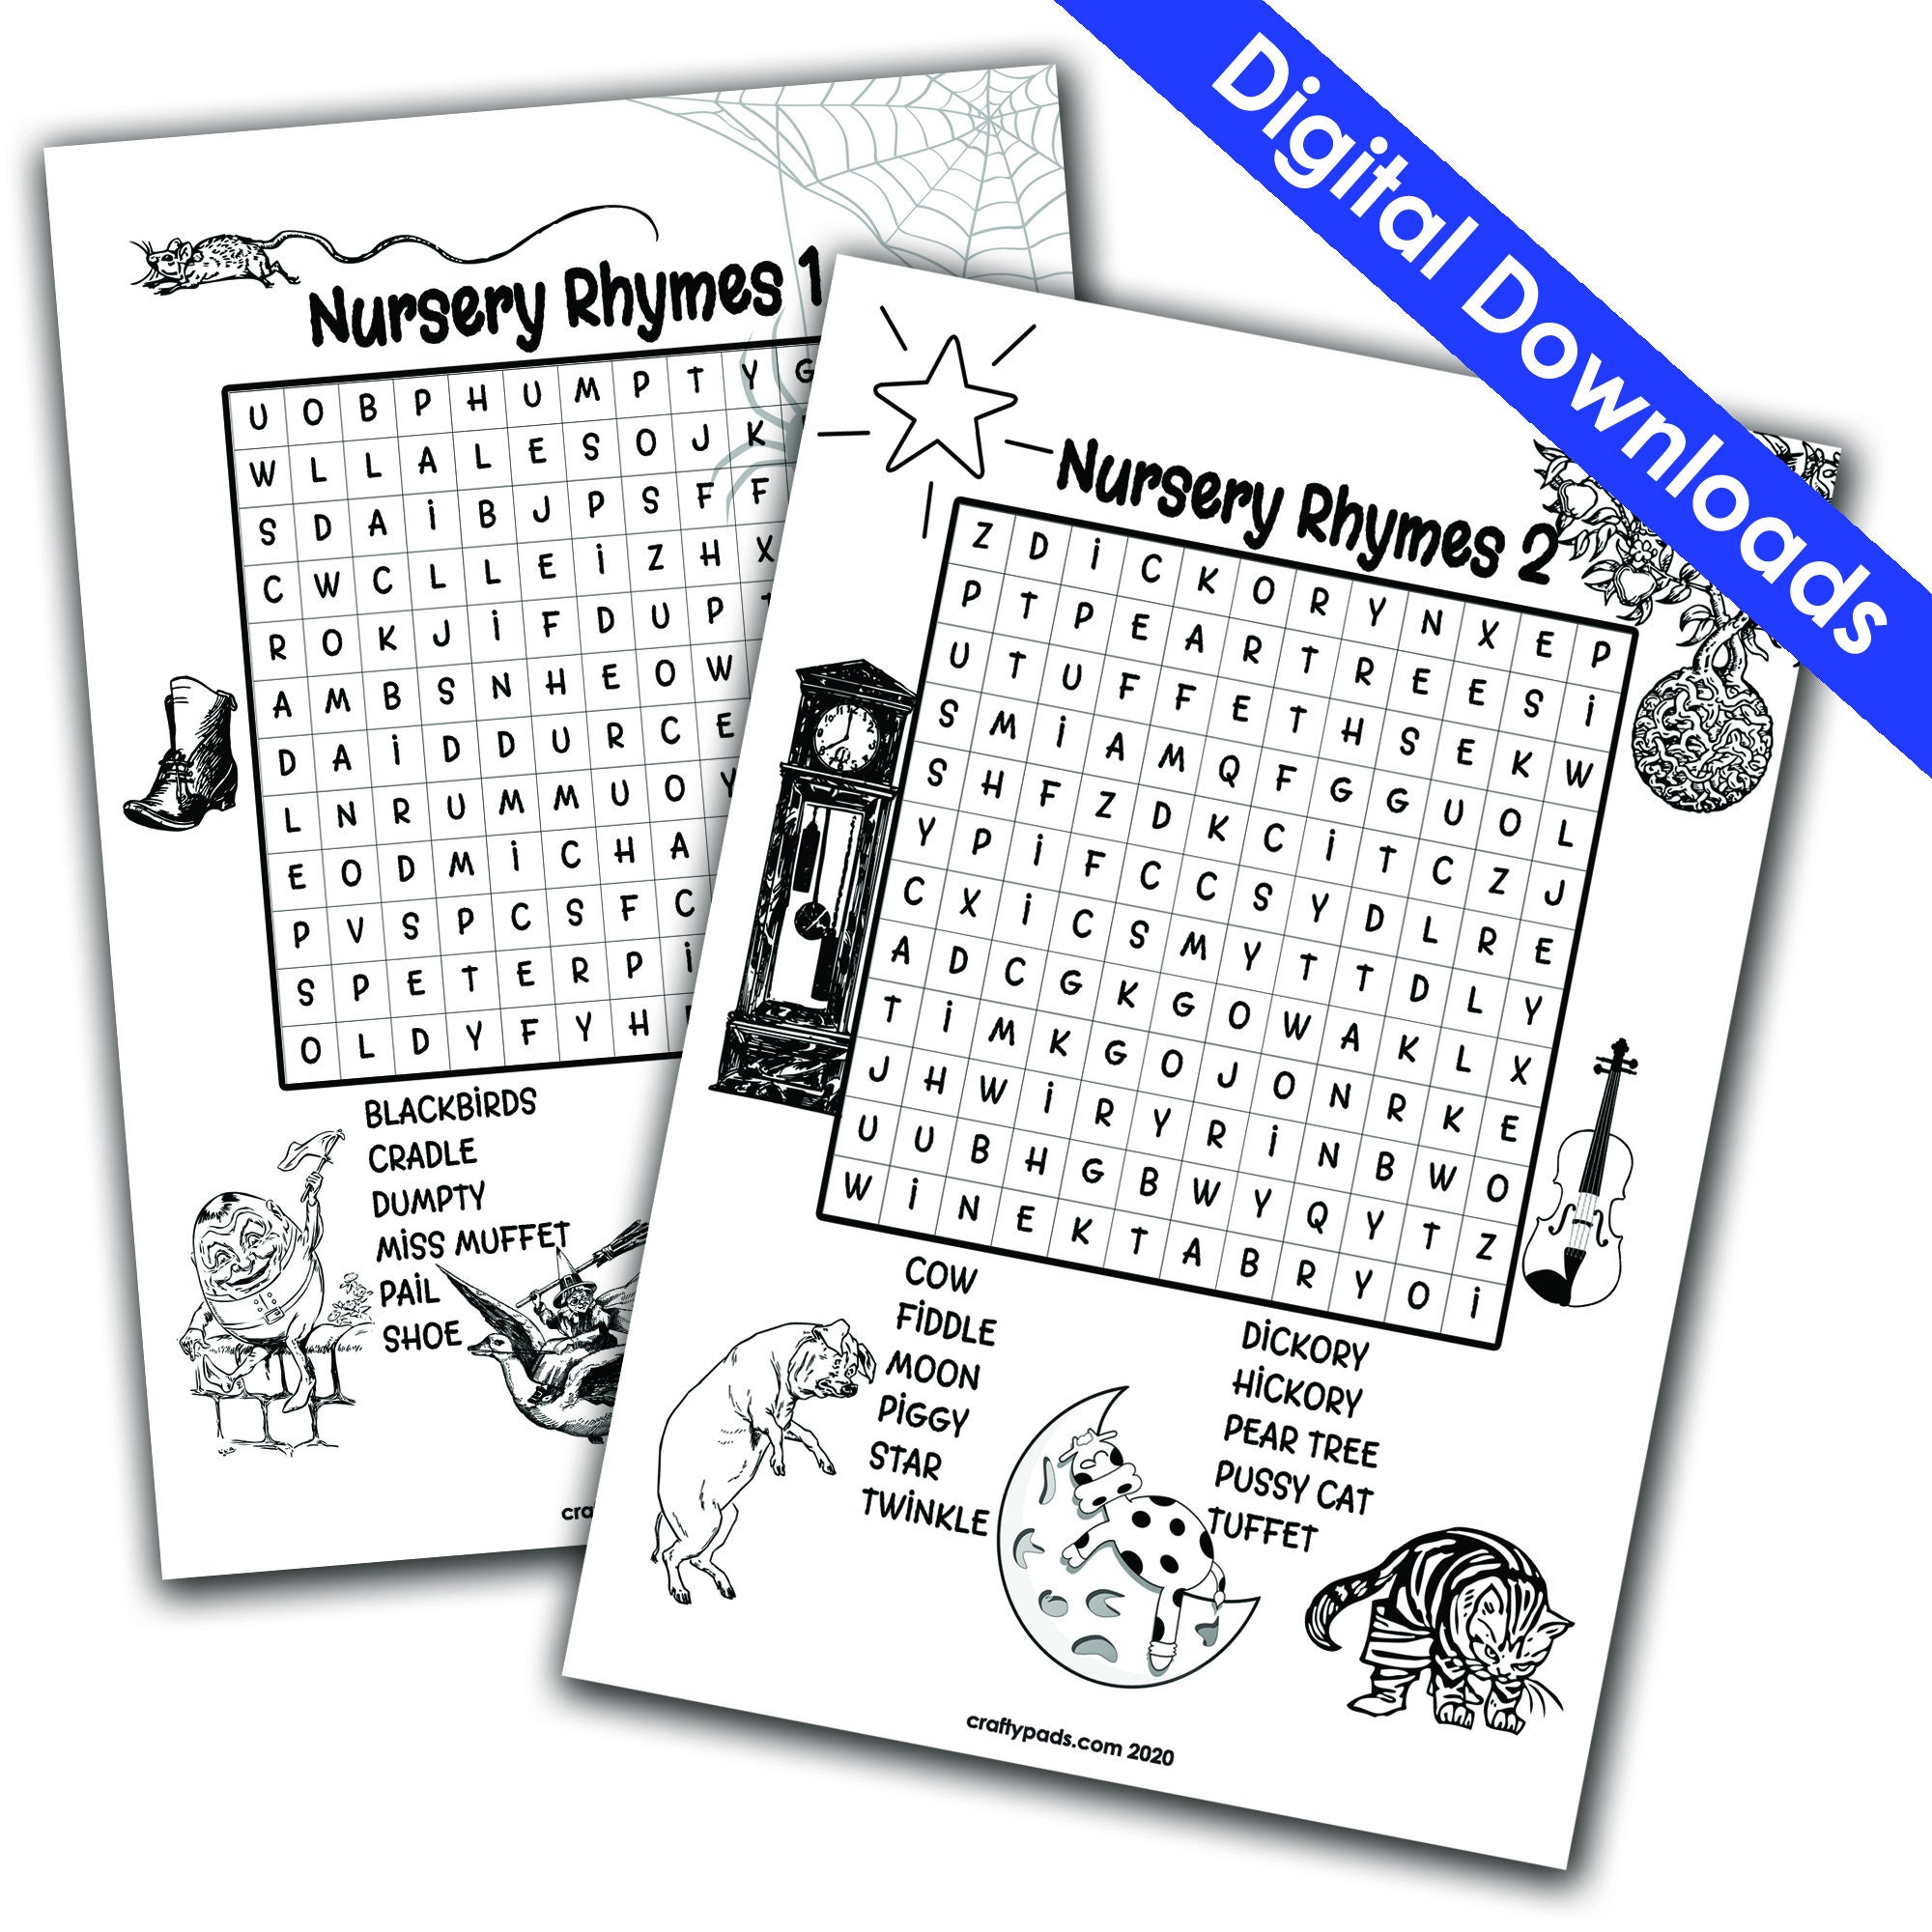 11-printable-word-search-activity-pages-for-kids-themes-3-etsy-uk